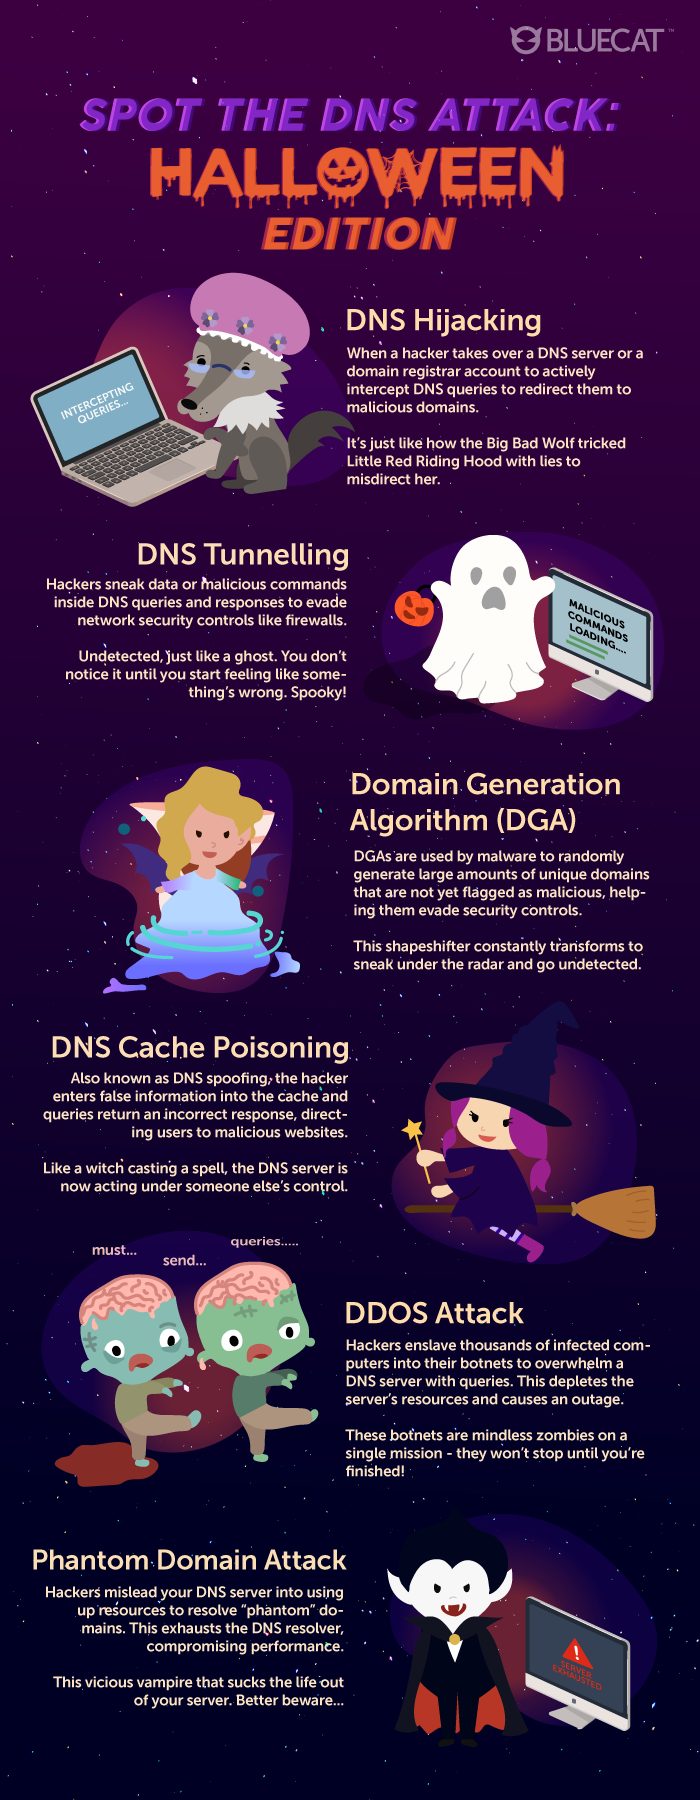 Domain Name System (DNS) attacks are no doubt scary. They interfere with your connection to the internet, invade your privacy, and cause lost productivity. DNS attacks have seen a rise because most organizations do not realize that it is a threat vector and therefore are not actively securing it. There are several different types of DNS attacks. Ever wondered what they would look like if they came to life? Boo! Here are 6 types of DNS attacks as Halloween characters